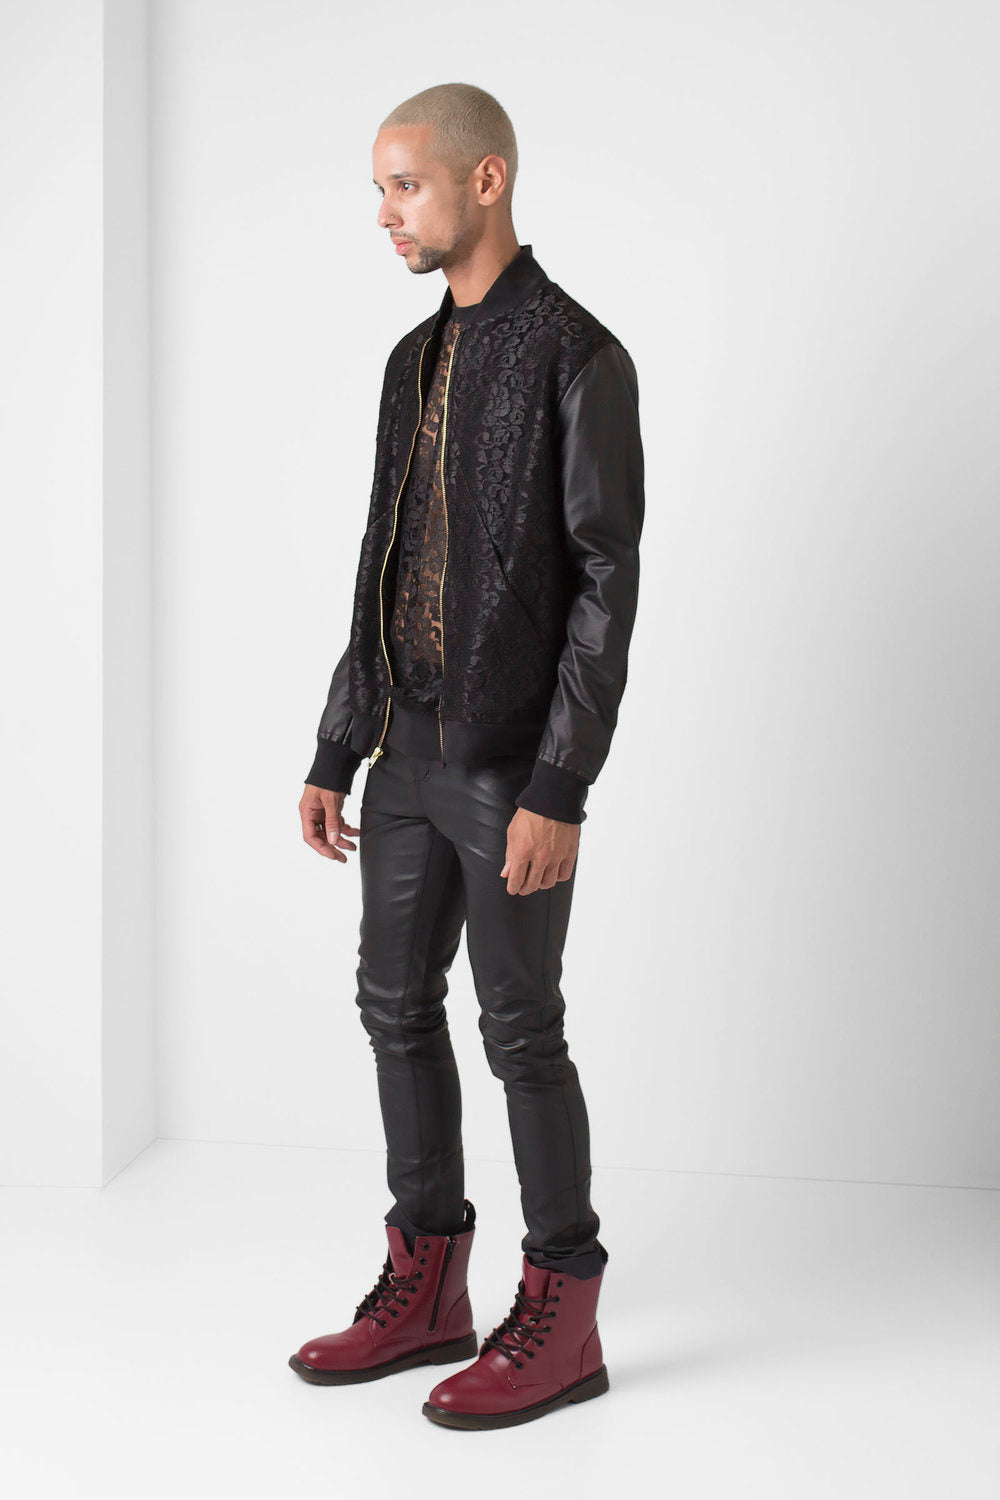 Lace Overlay Bomber Jacket with Faux Leather Sleeves- Black - pacorogiene